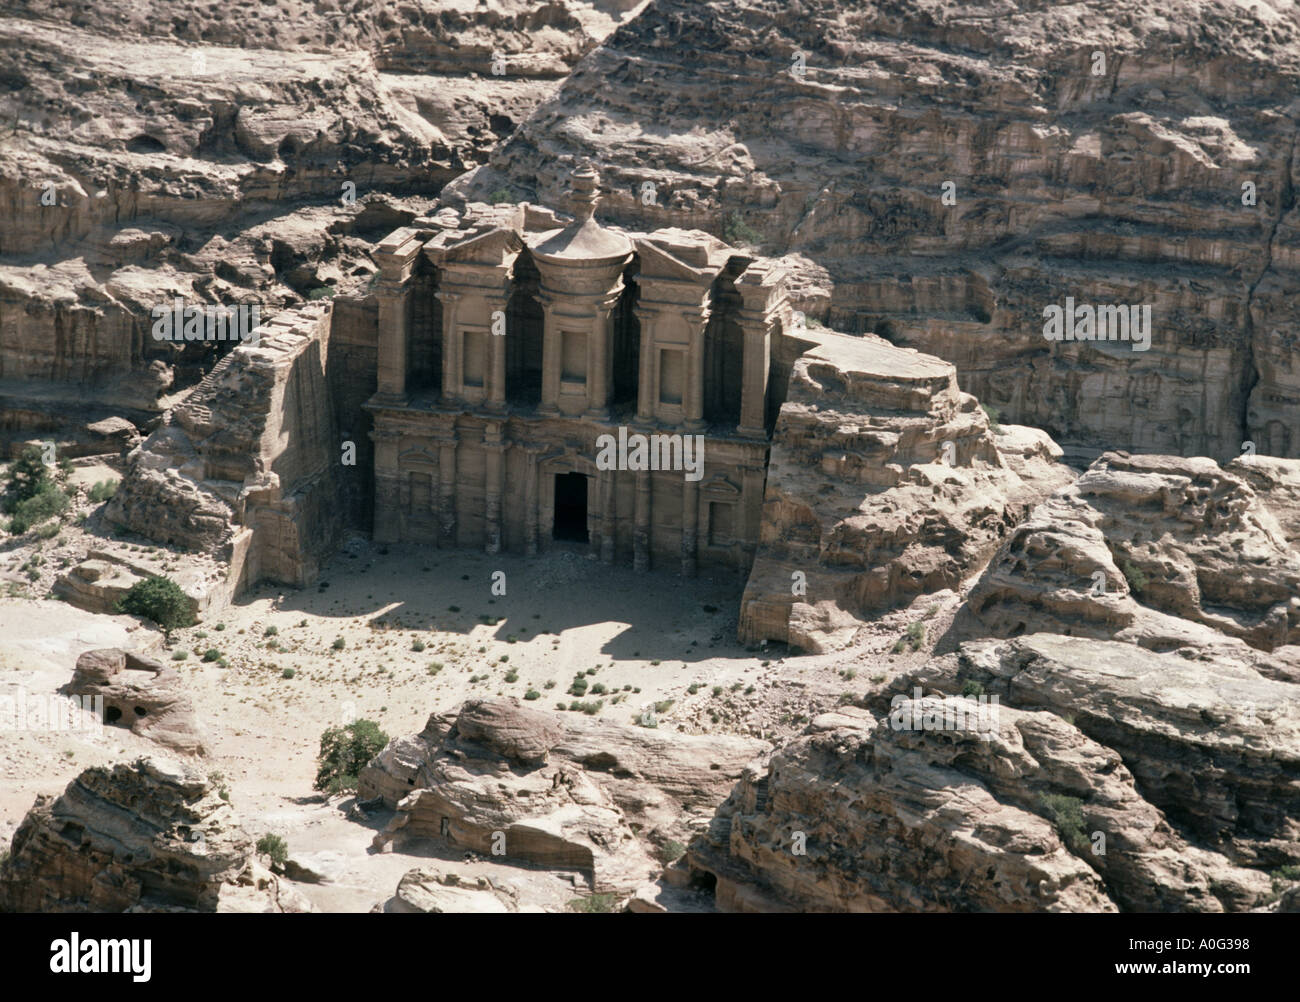 Aerial view of the monument known as the Al Dier or Monastery in the ancient rose red city of Petra in Jordan Stock Photo